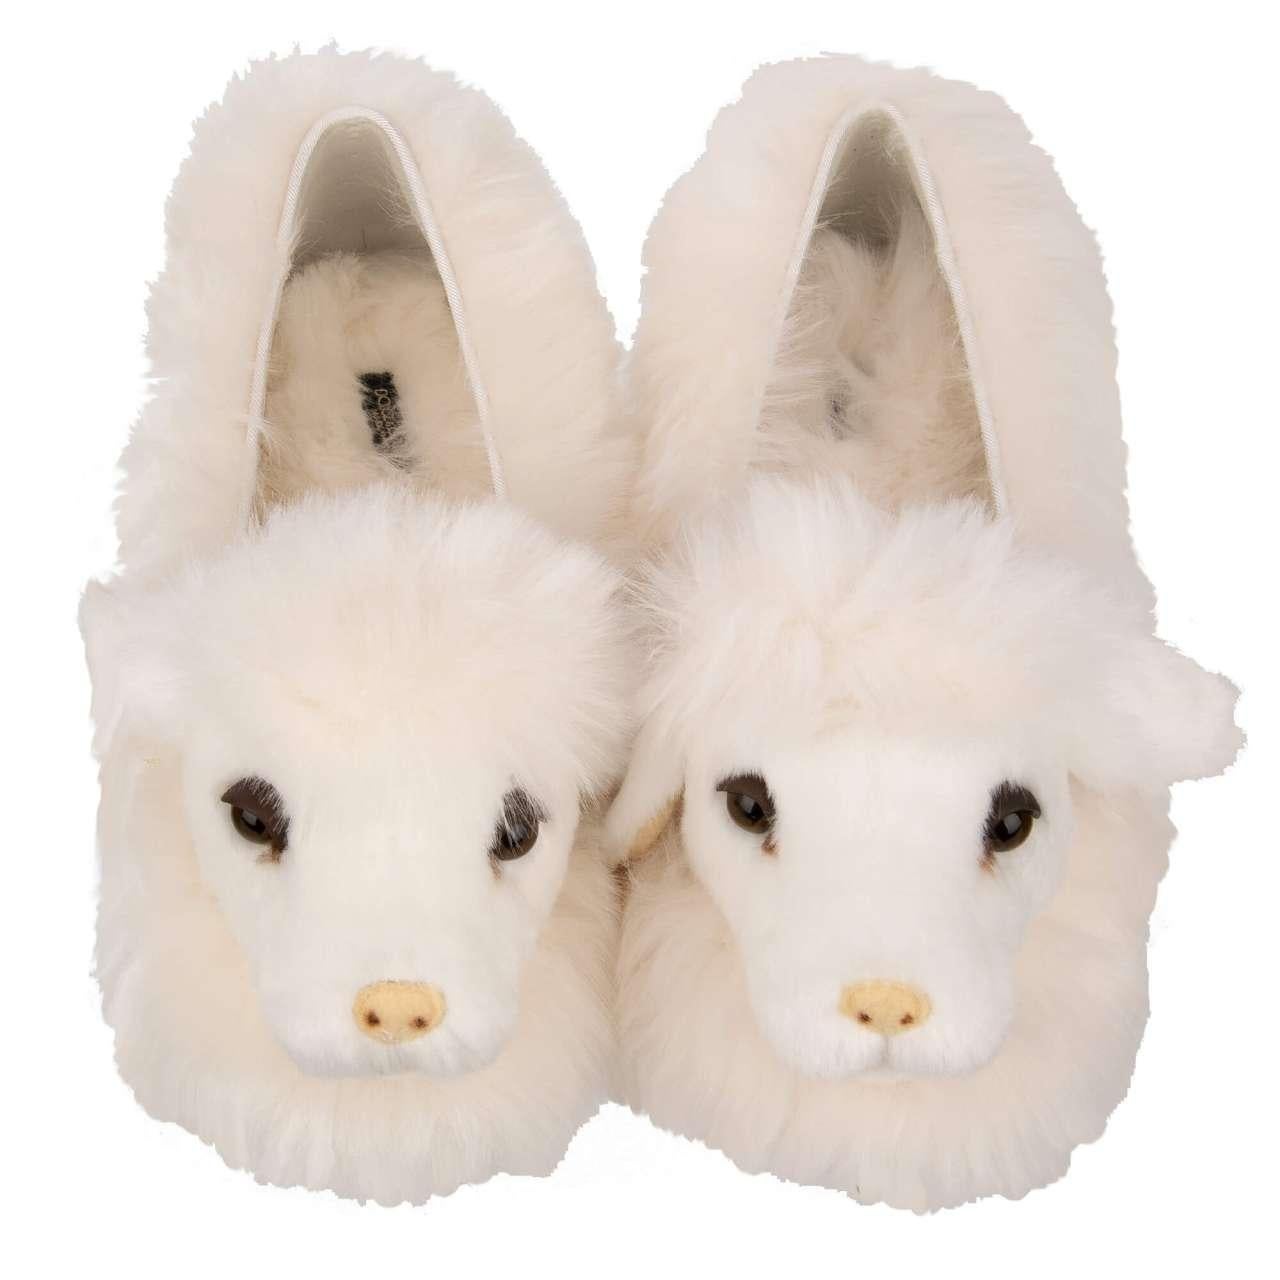 Dolce & Gabbana - Sheep Toy Eco Faux Fur Ballet Flats VALLY White 39.9 For Sale 2